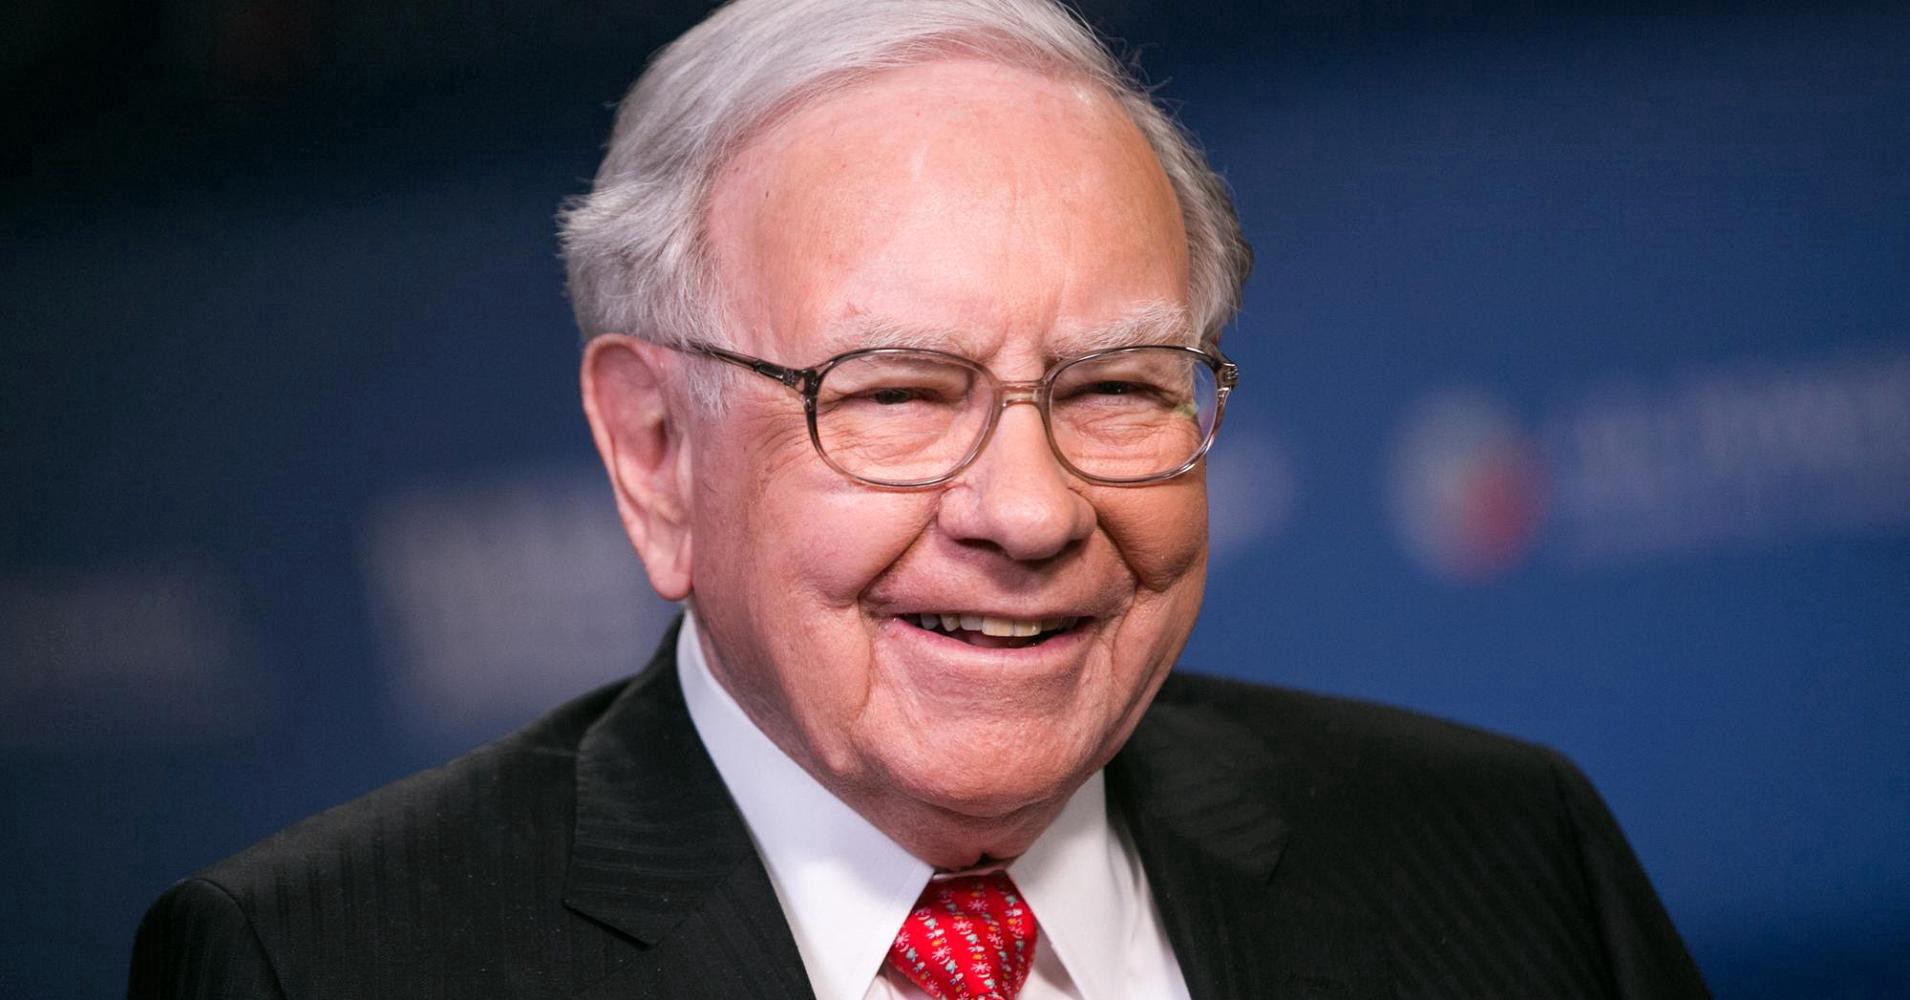 In a volatile market, you need to keep in mind these three principles of Buffett